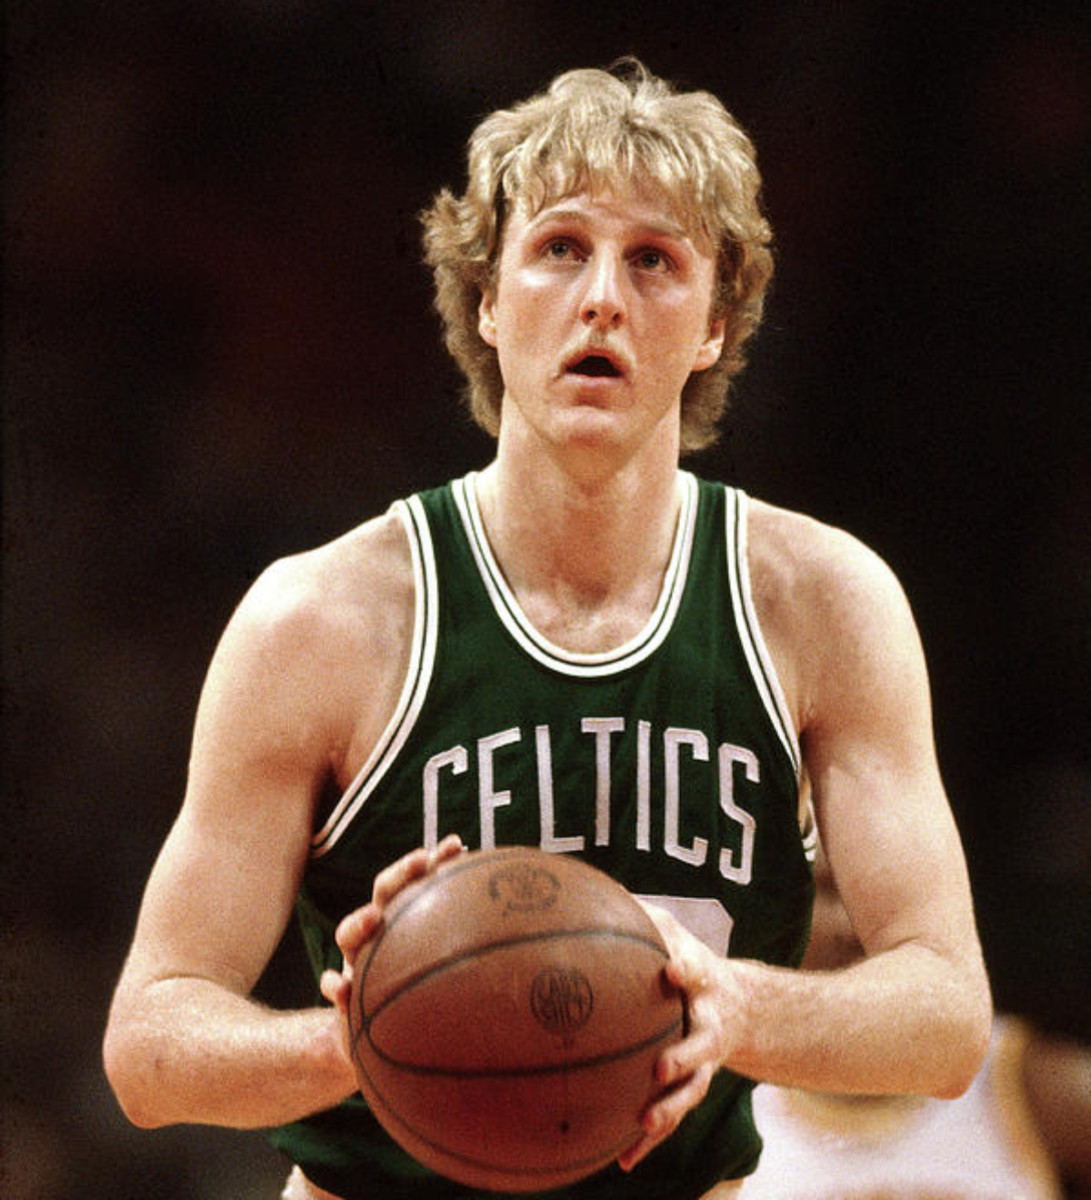 Larry Bird Injured His Finger In A Bar Fight, Won $160 In A Free-Throw Shooting Contest With His Hand Taped Up And Then Played The Next Night With The Money In His Shoe